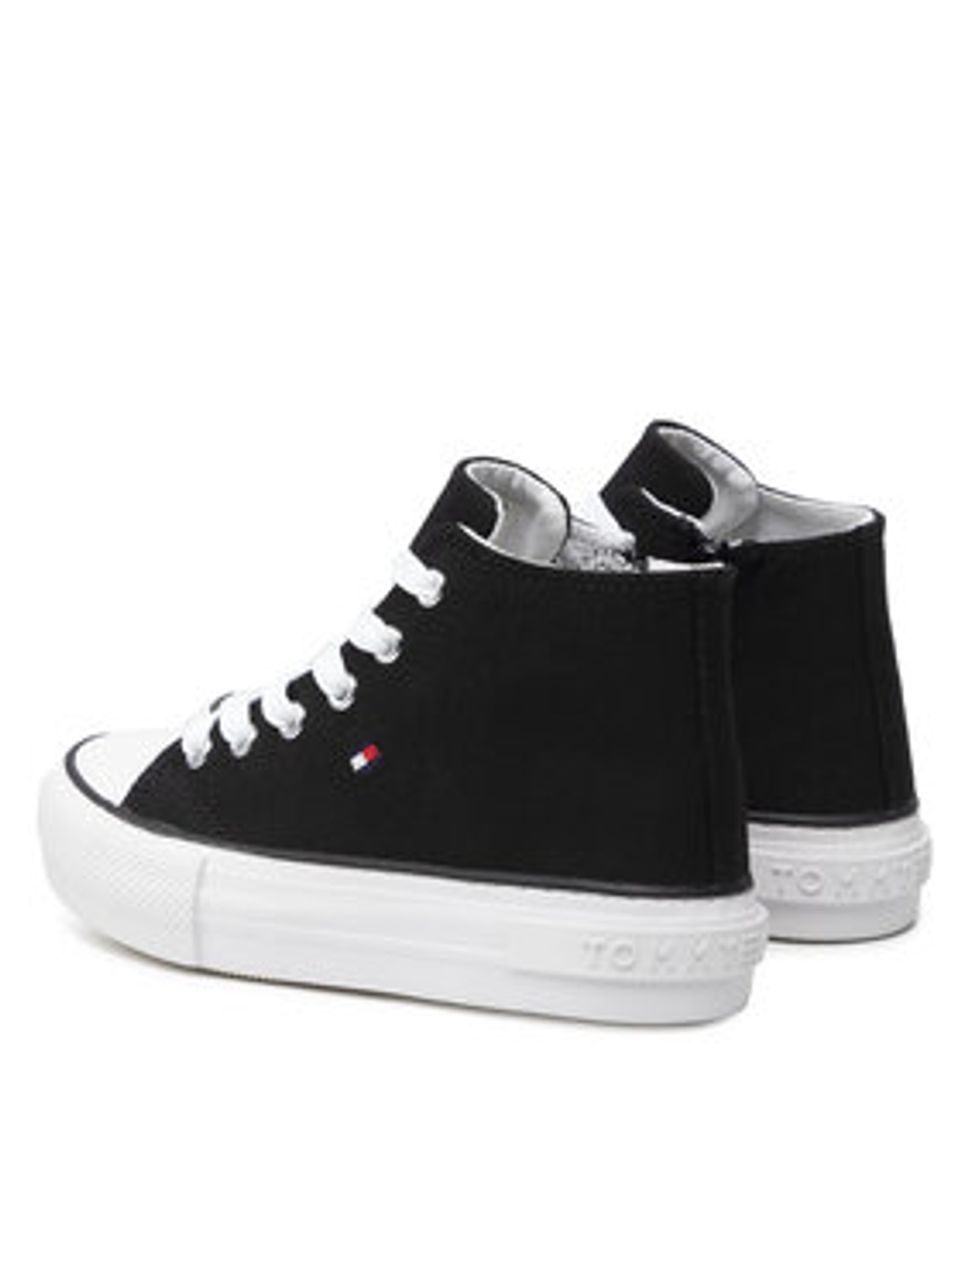 Tommy Hilfiger Sneakers aus Stoff High Top Lace-Up Sneaker T3A4-32119-0890 Schwarz